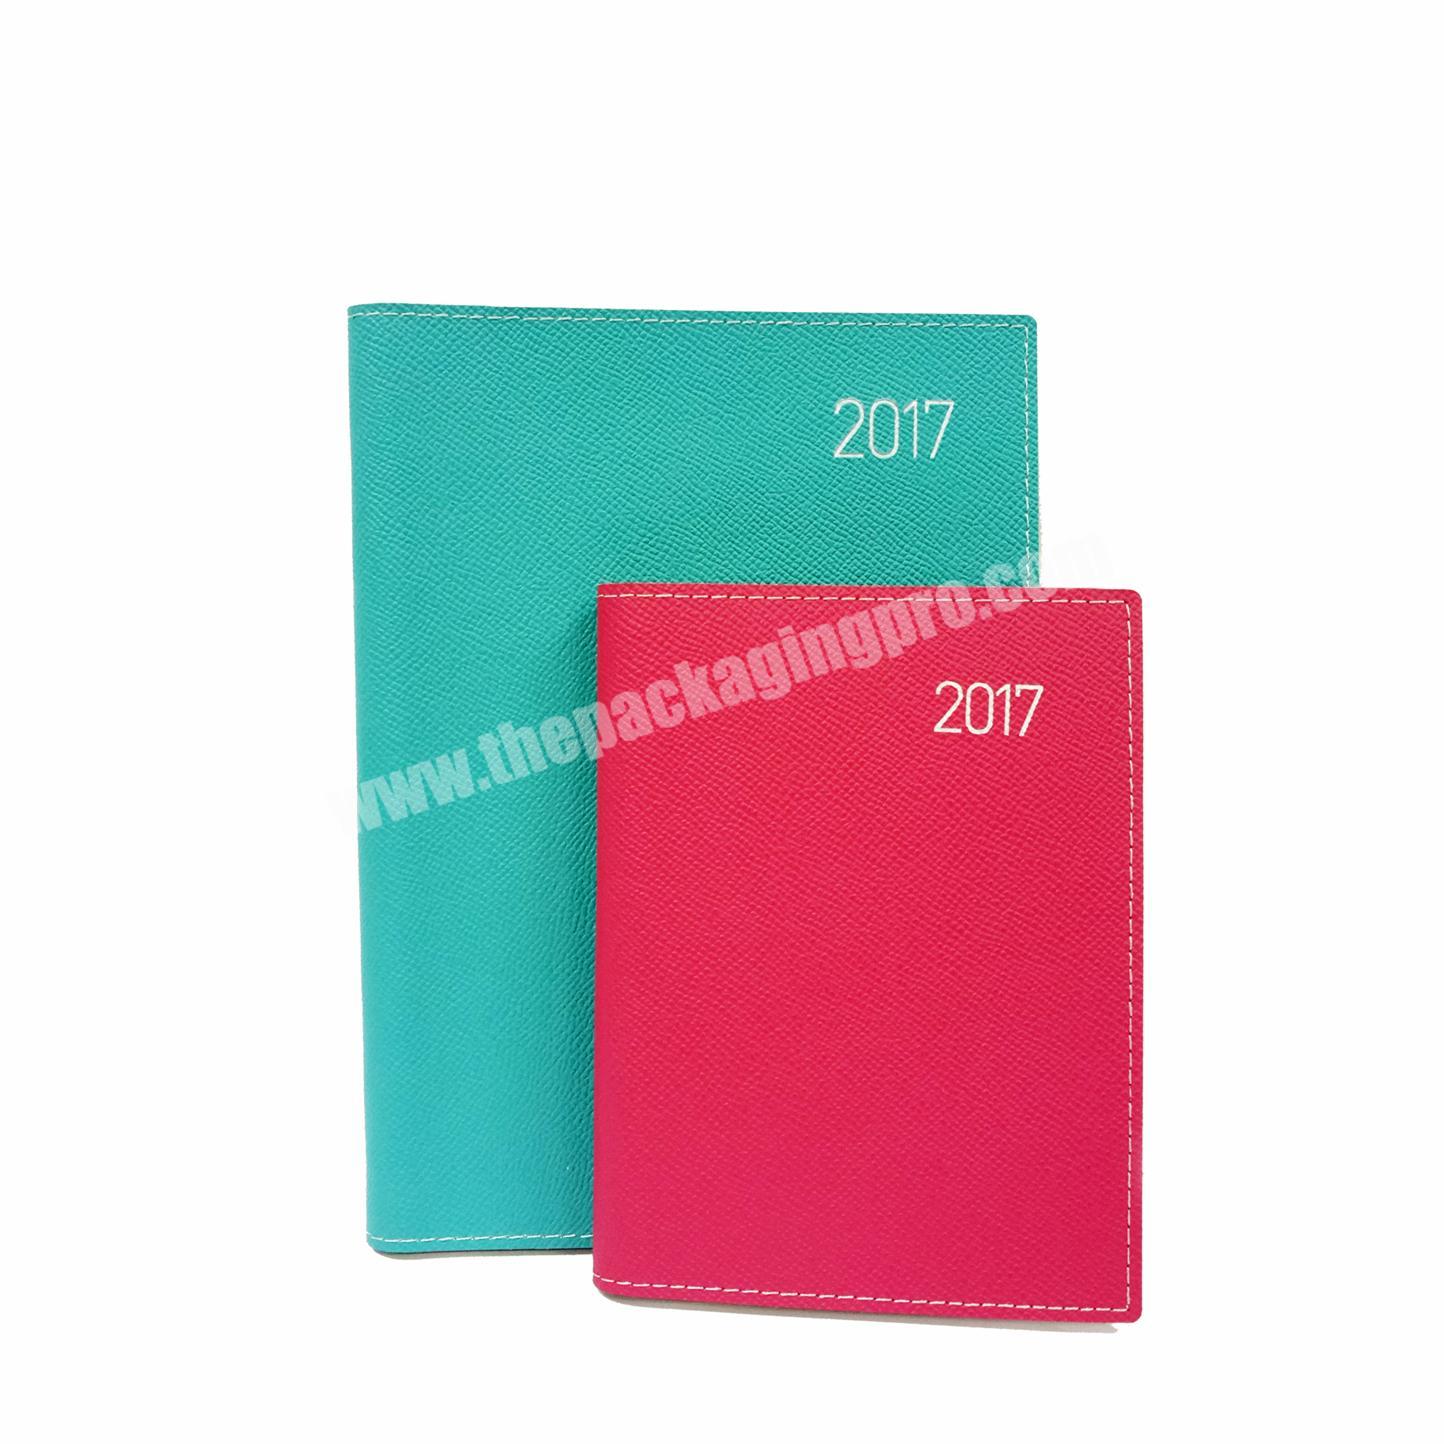 Promotional Leather Cover Diary For Student Spiral Composition Notebook